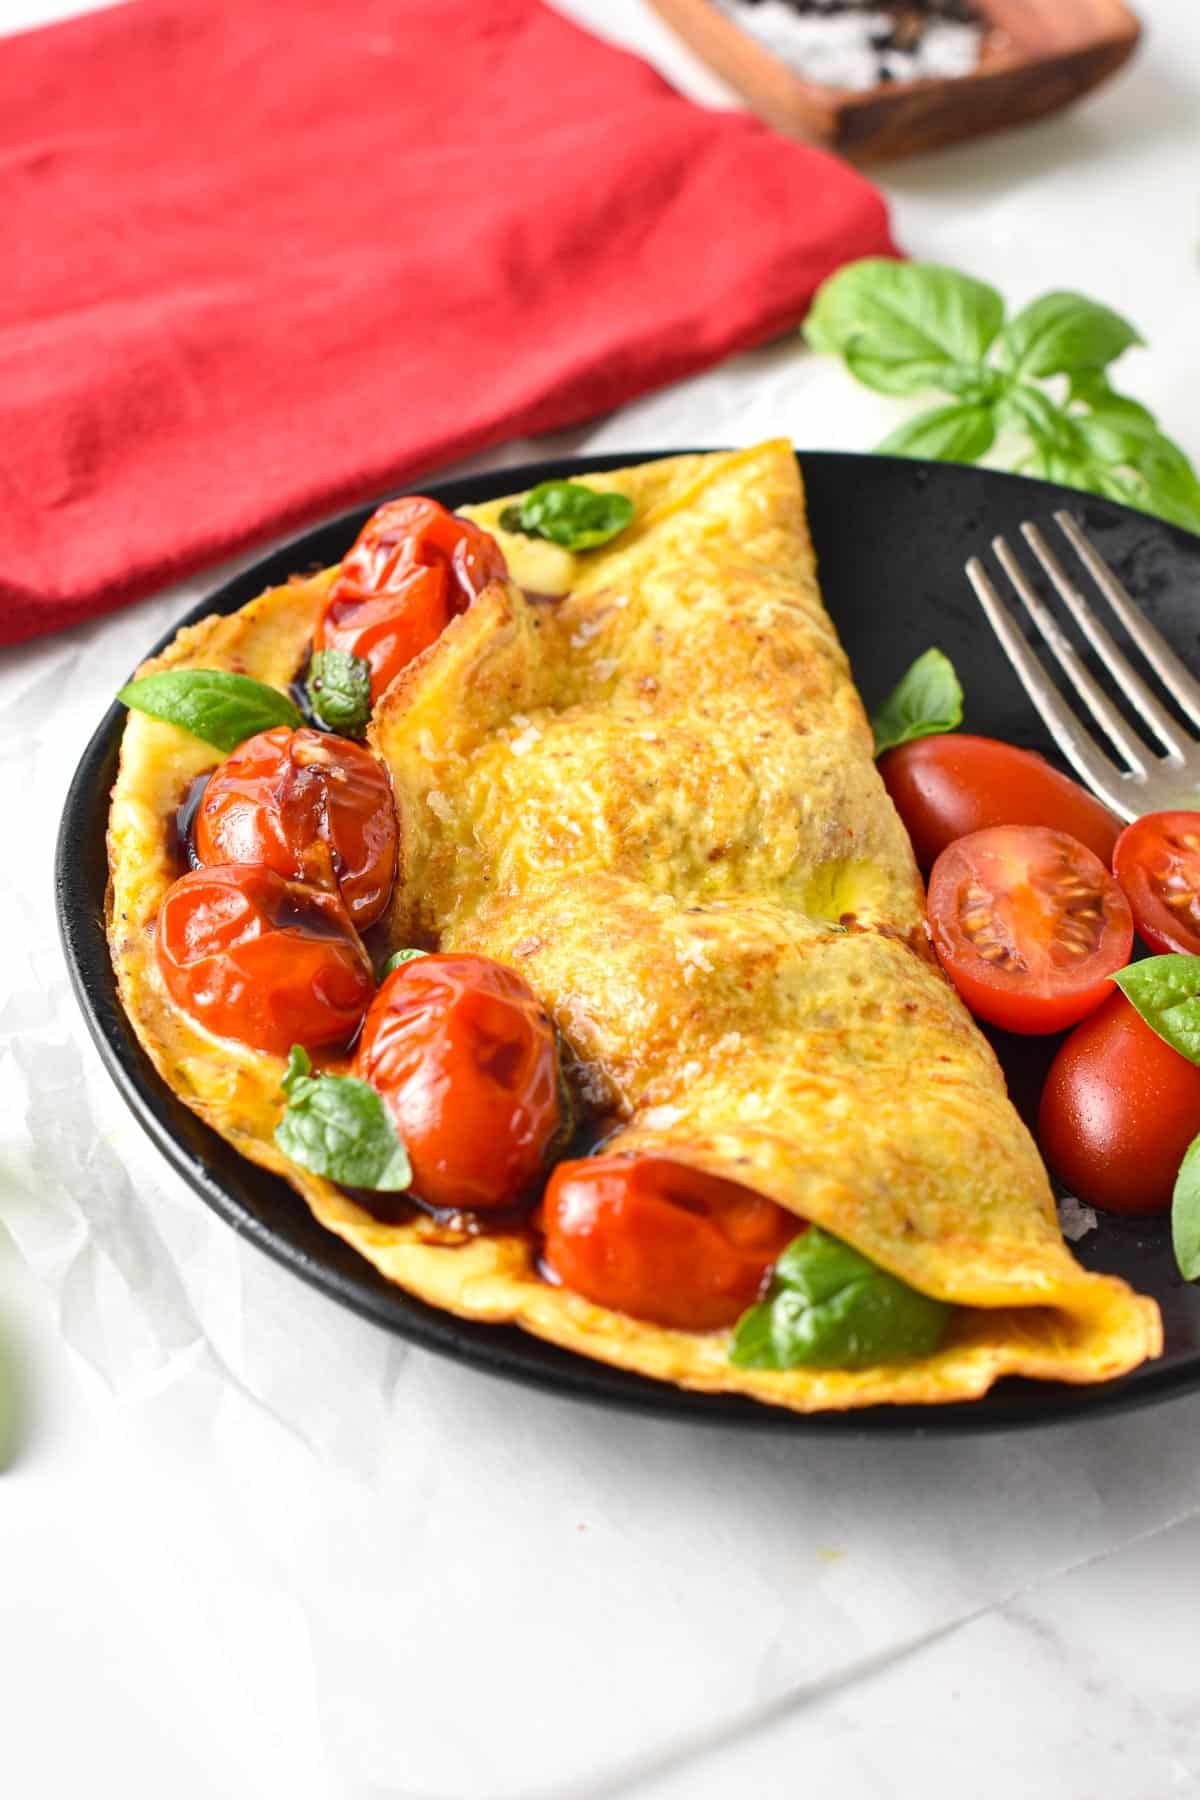 This Tomato Omelette is an easy, healthy breakfast recipe packed with summer flavors from juicy pan-fried cherry tomatoes, basil, and Parmesan cheese. If you love your eggs for breakfast, or you are looking for a fancy brunch, this omelette with tomato basil is a must-try.This Tomato Omelette is an easy, healthy breakfast recipe packed with summer flavors from juicy pan-fried cherry tomatoes, basil, and Parmesan cheese. If you love your eggs for breakfast, or you are looking for a fancy brunch, this omelette with tomato basil is a must-try.